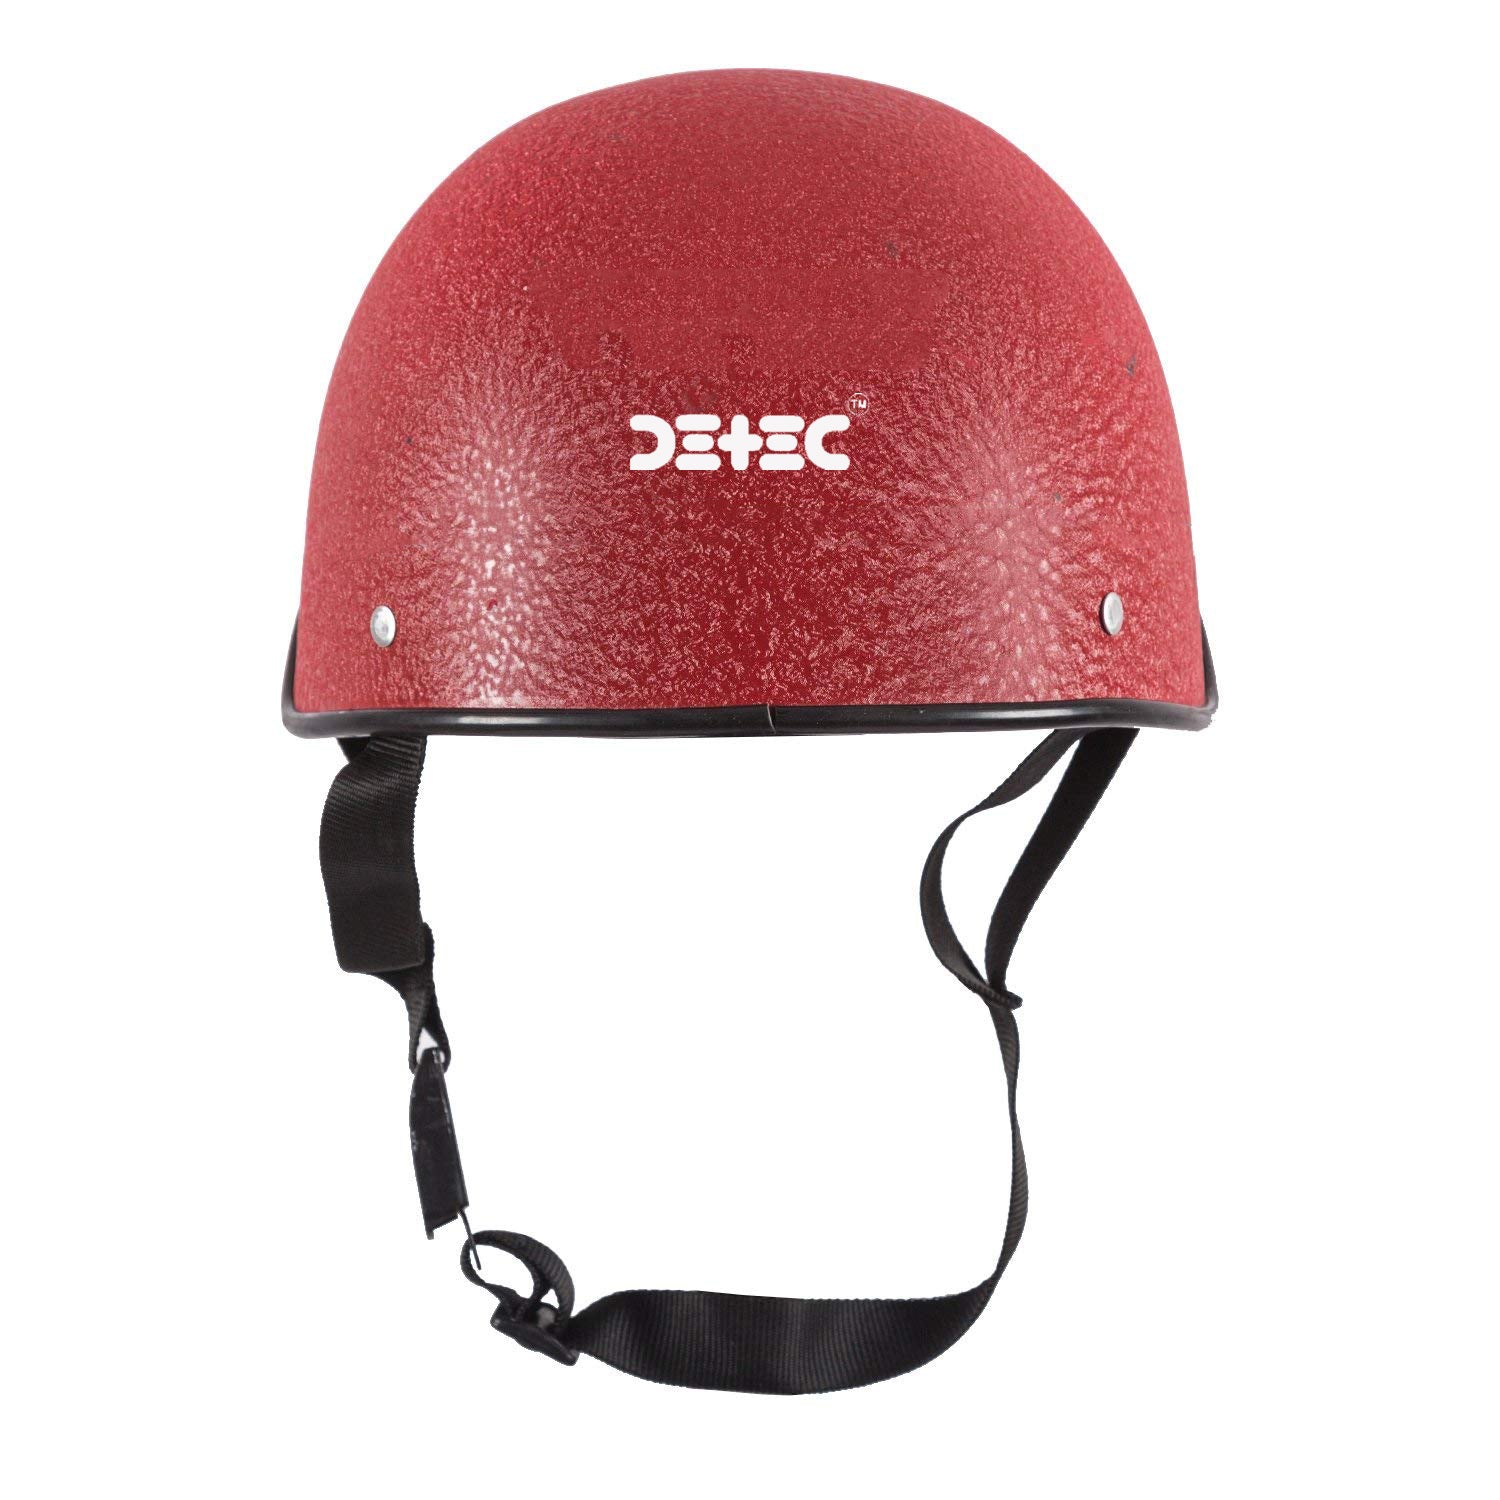 Detec™ Safety Helmet with Quick Release Strap for Men & Women (Red, Free Size)